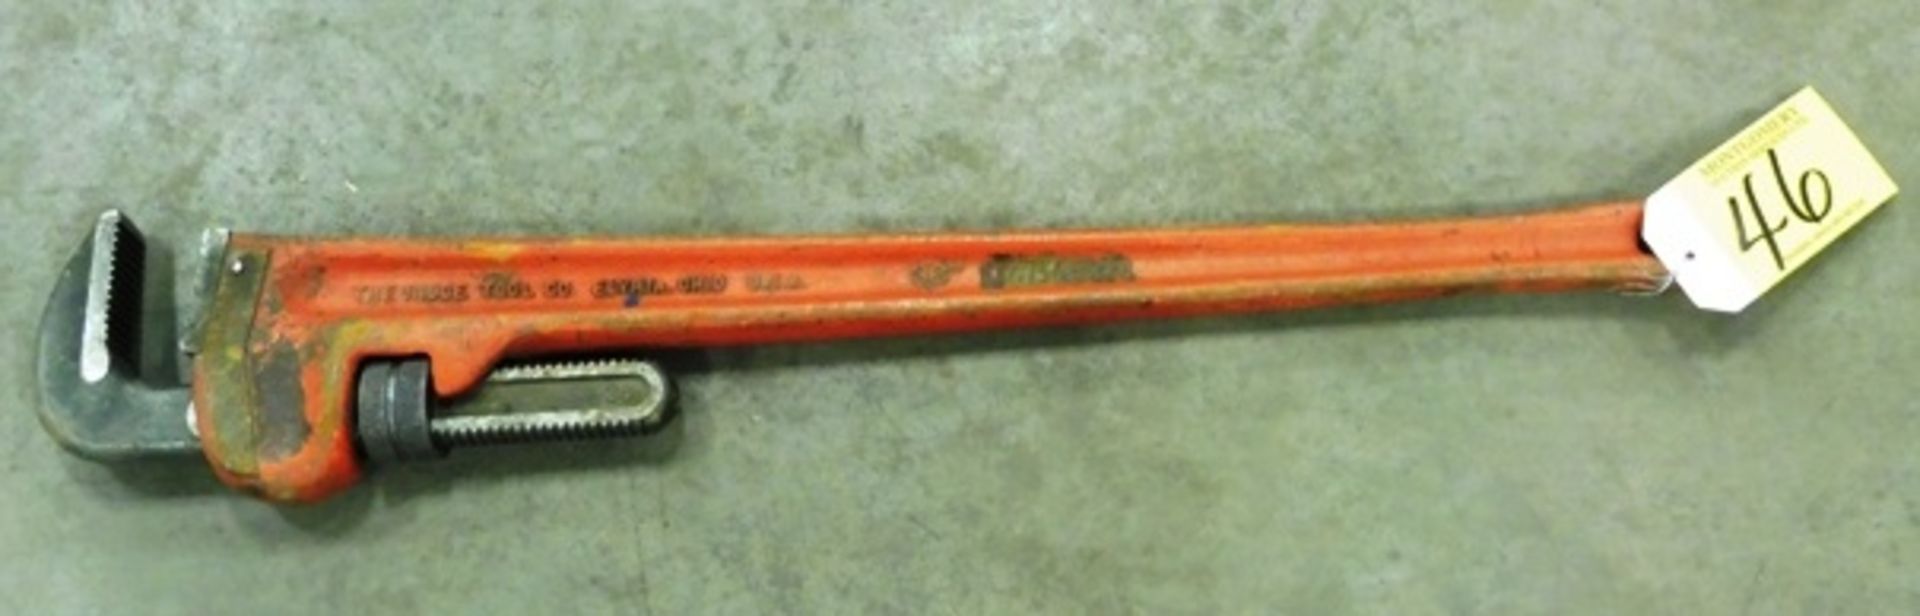 RIDGID 36 IN. STEEL PIPEWRENCH